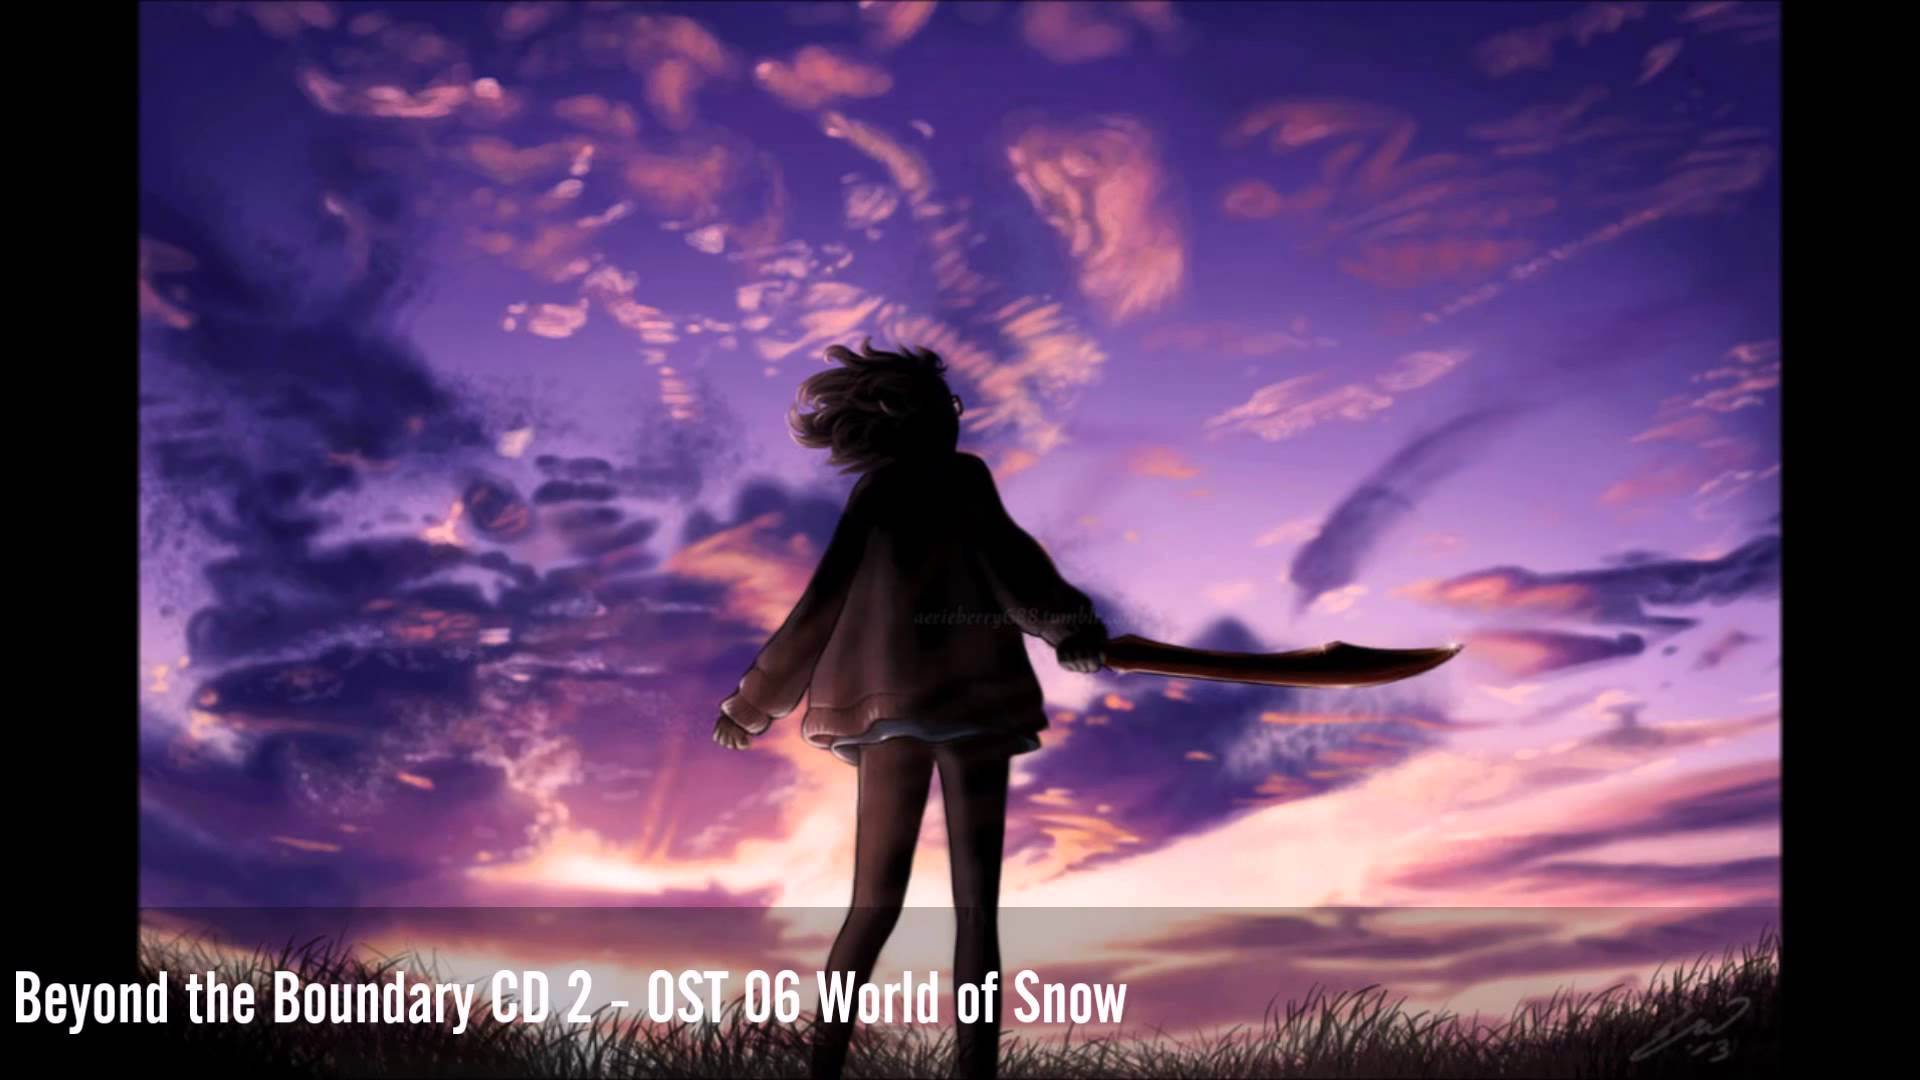 Beyond the Boundary CD 2 06 World of Snow